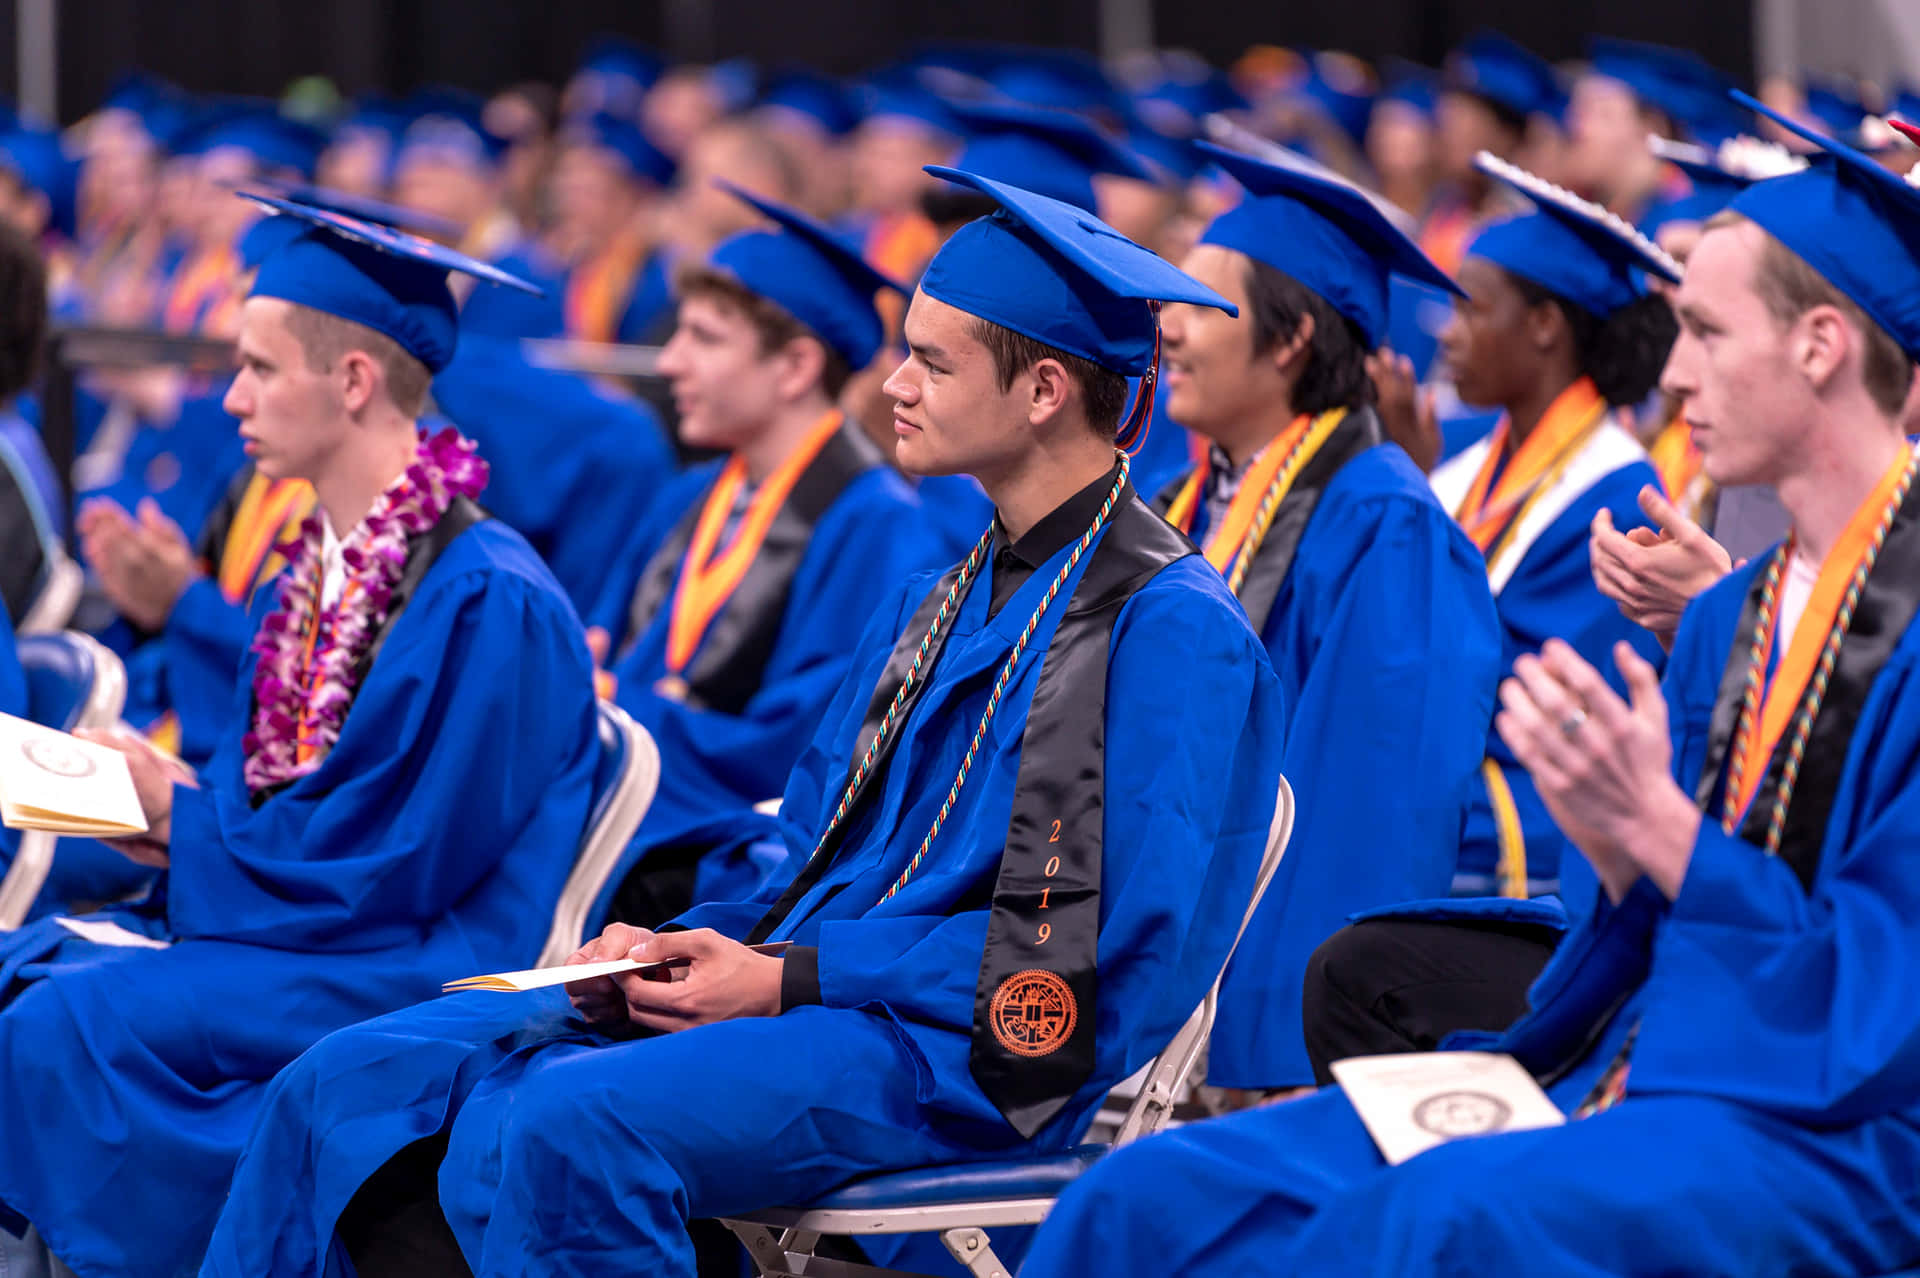 A Group Of Graduates In Blue Gowns Clapping